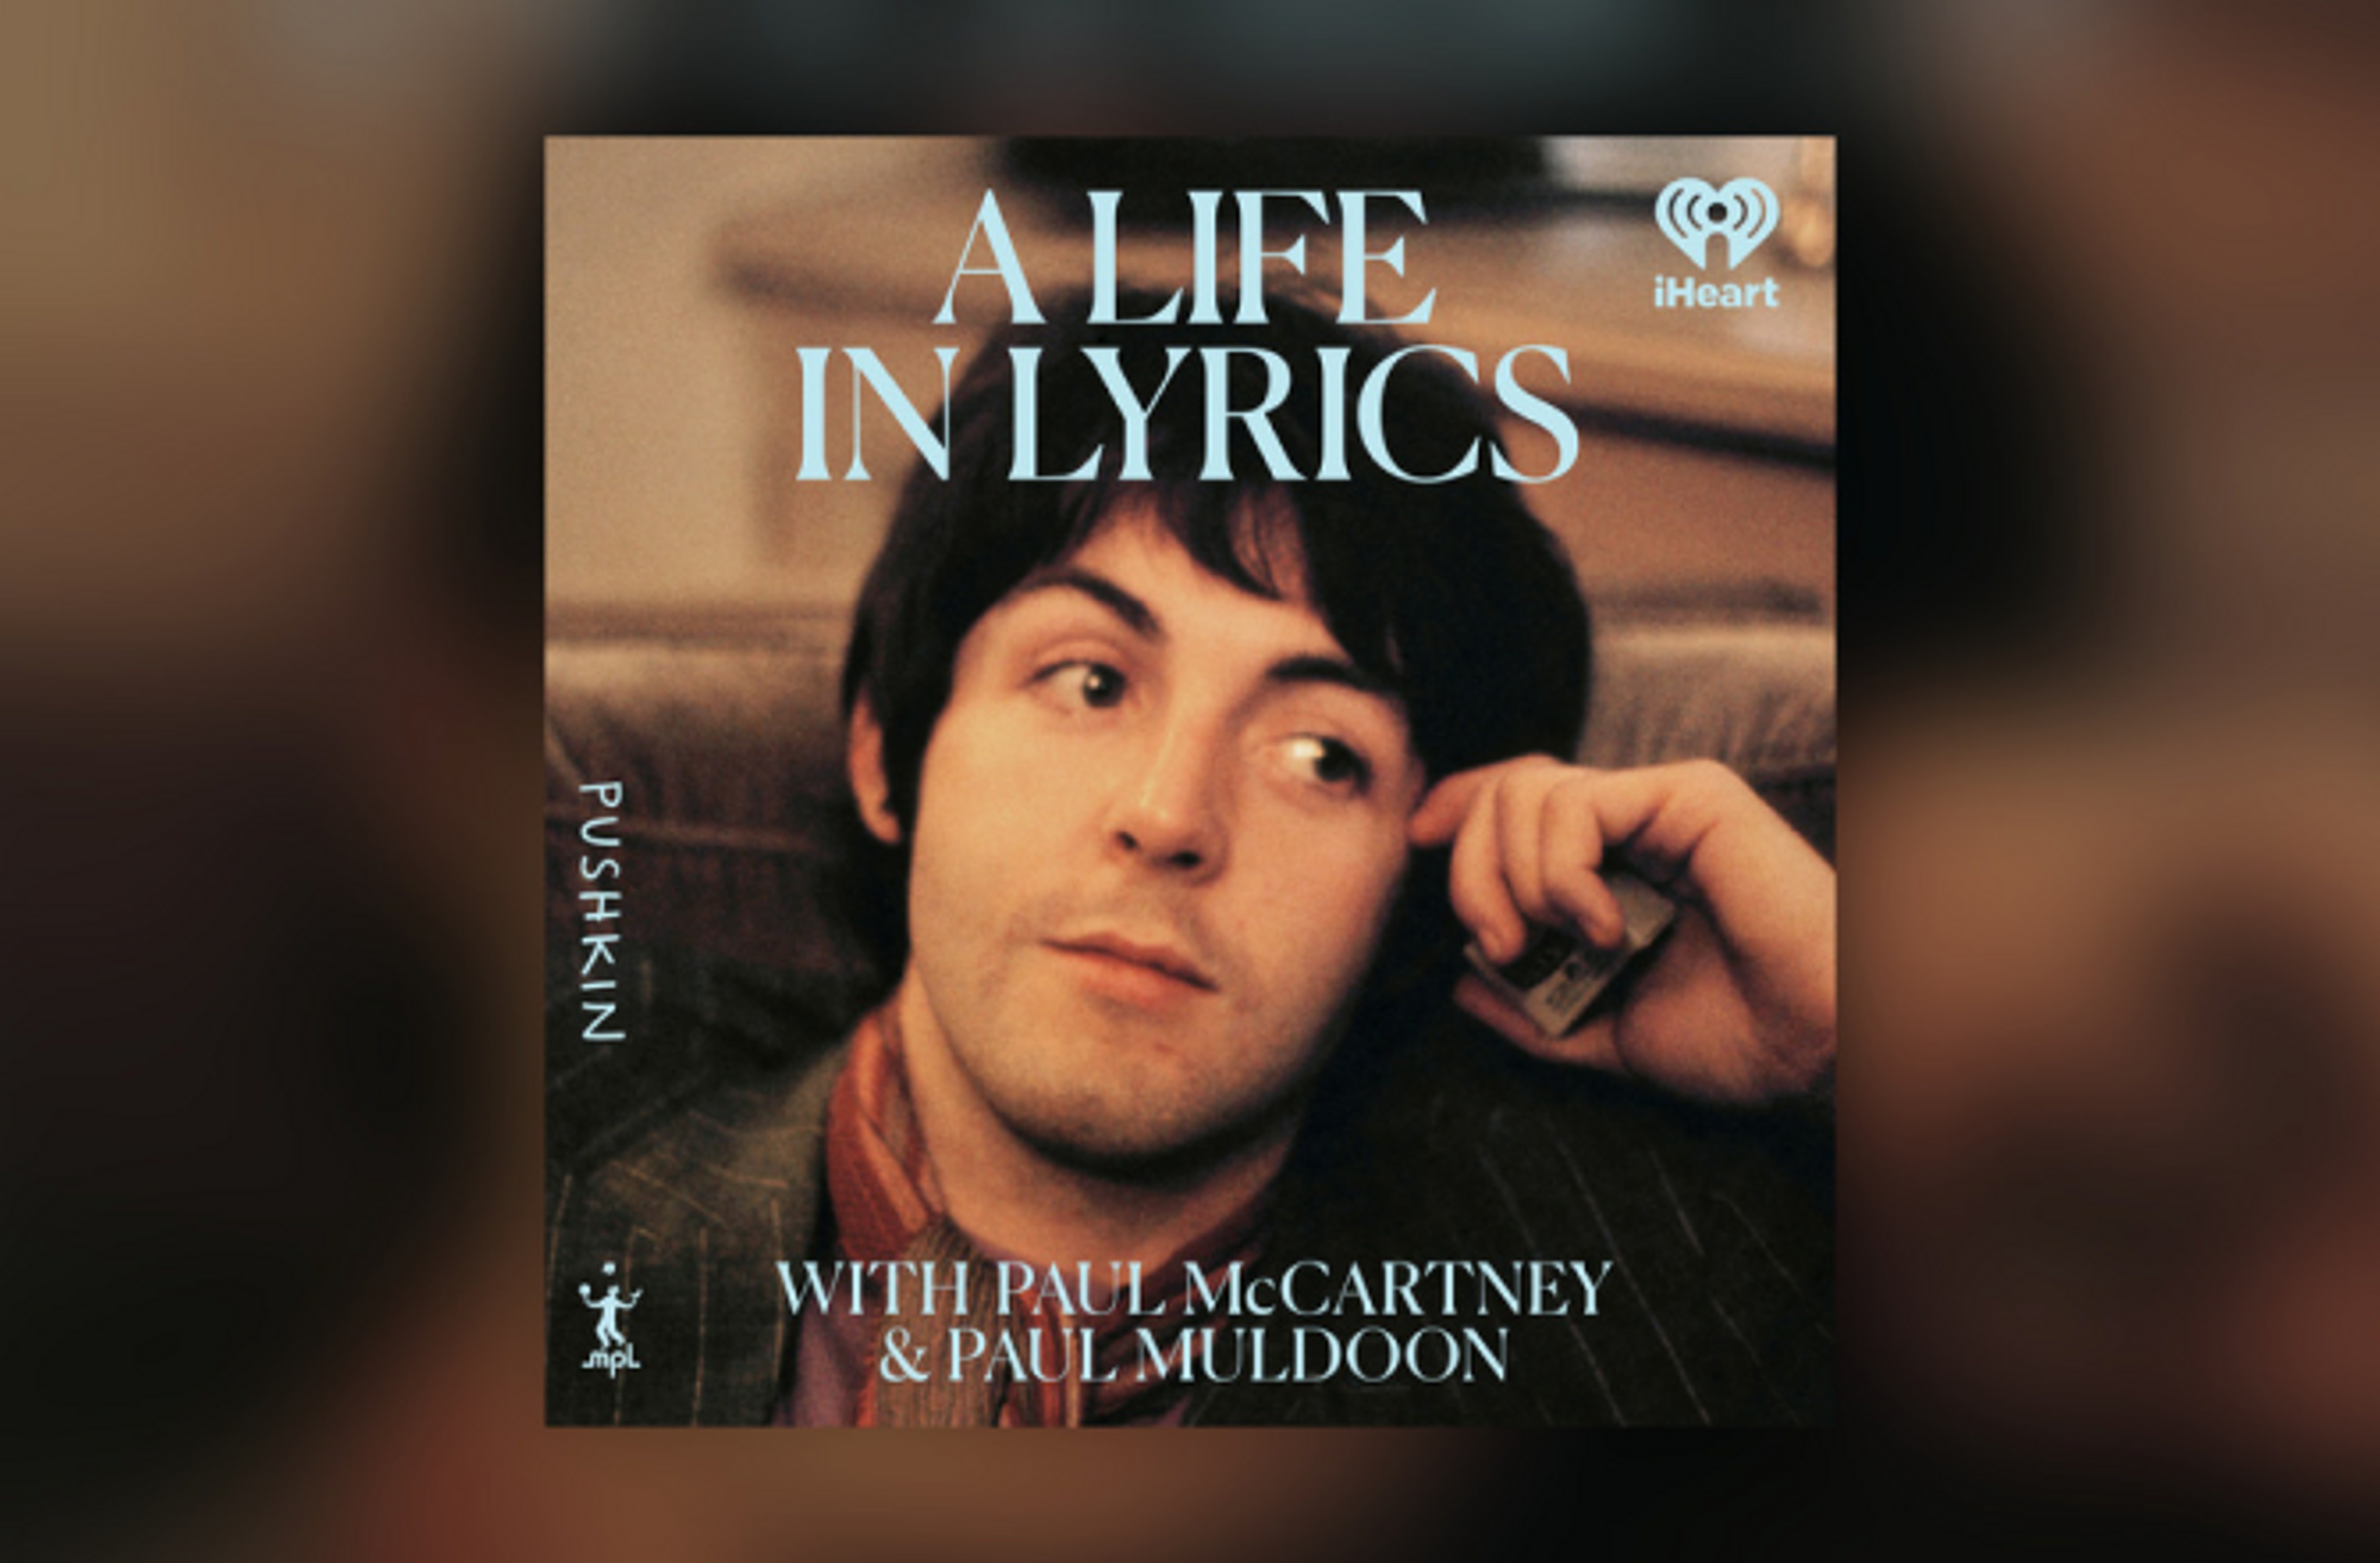 A Life in Lyrics cover image